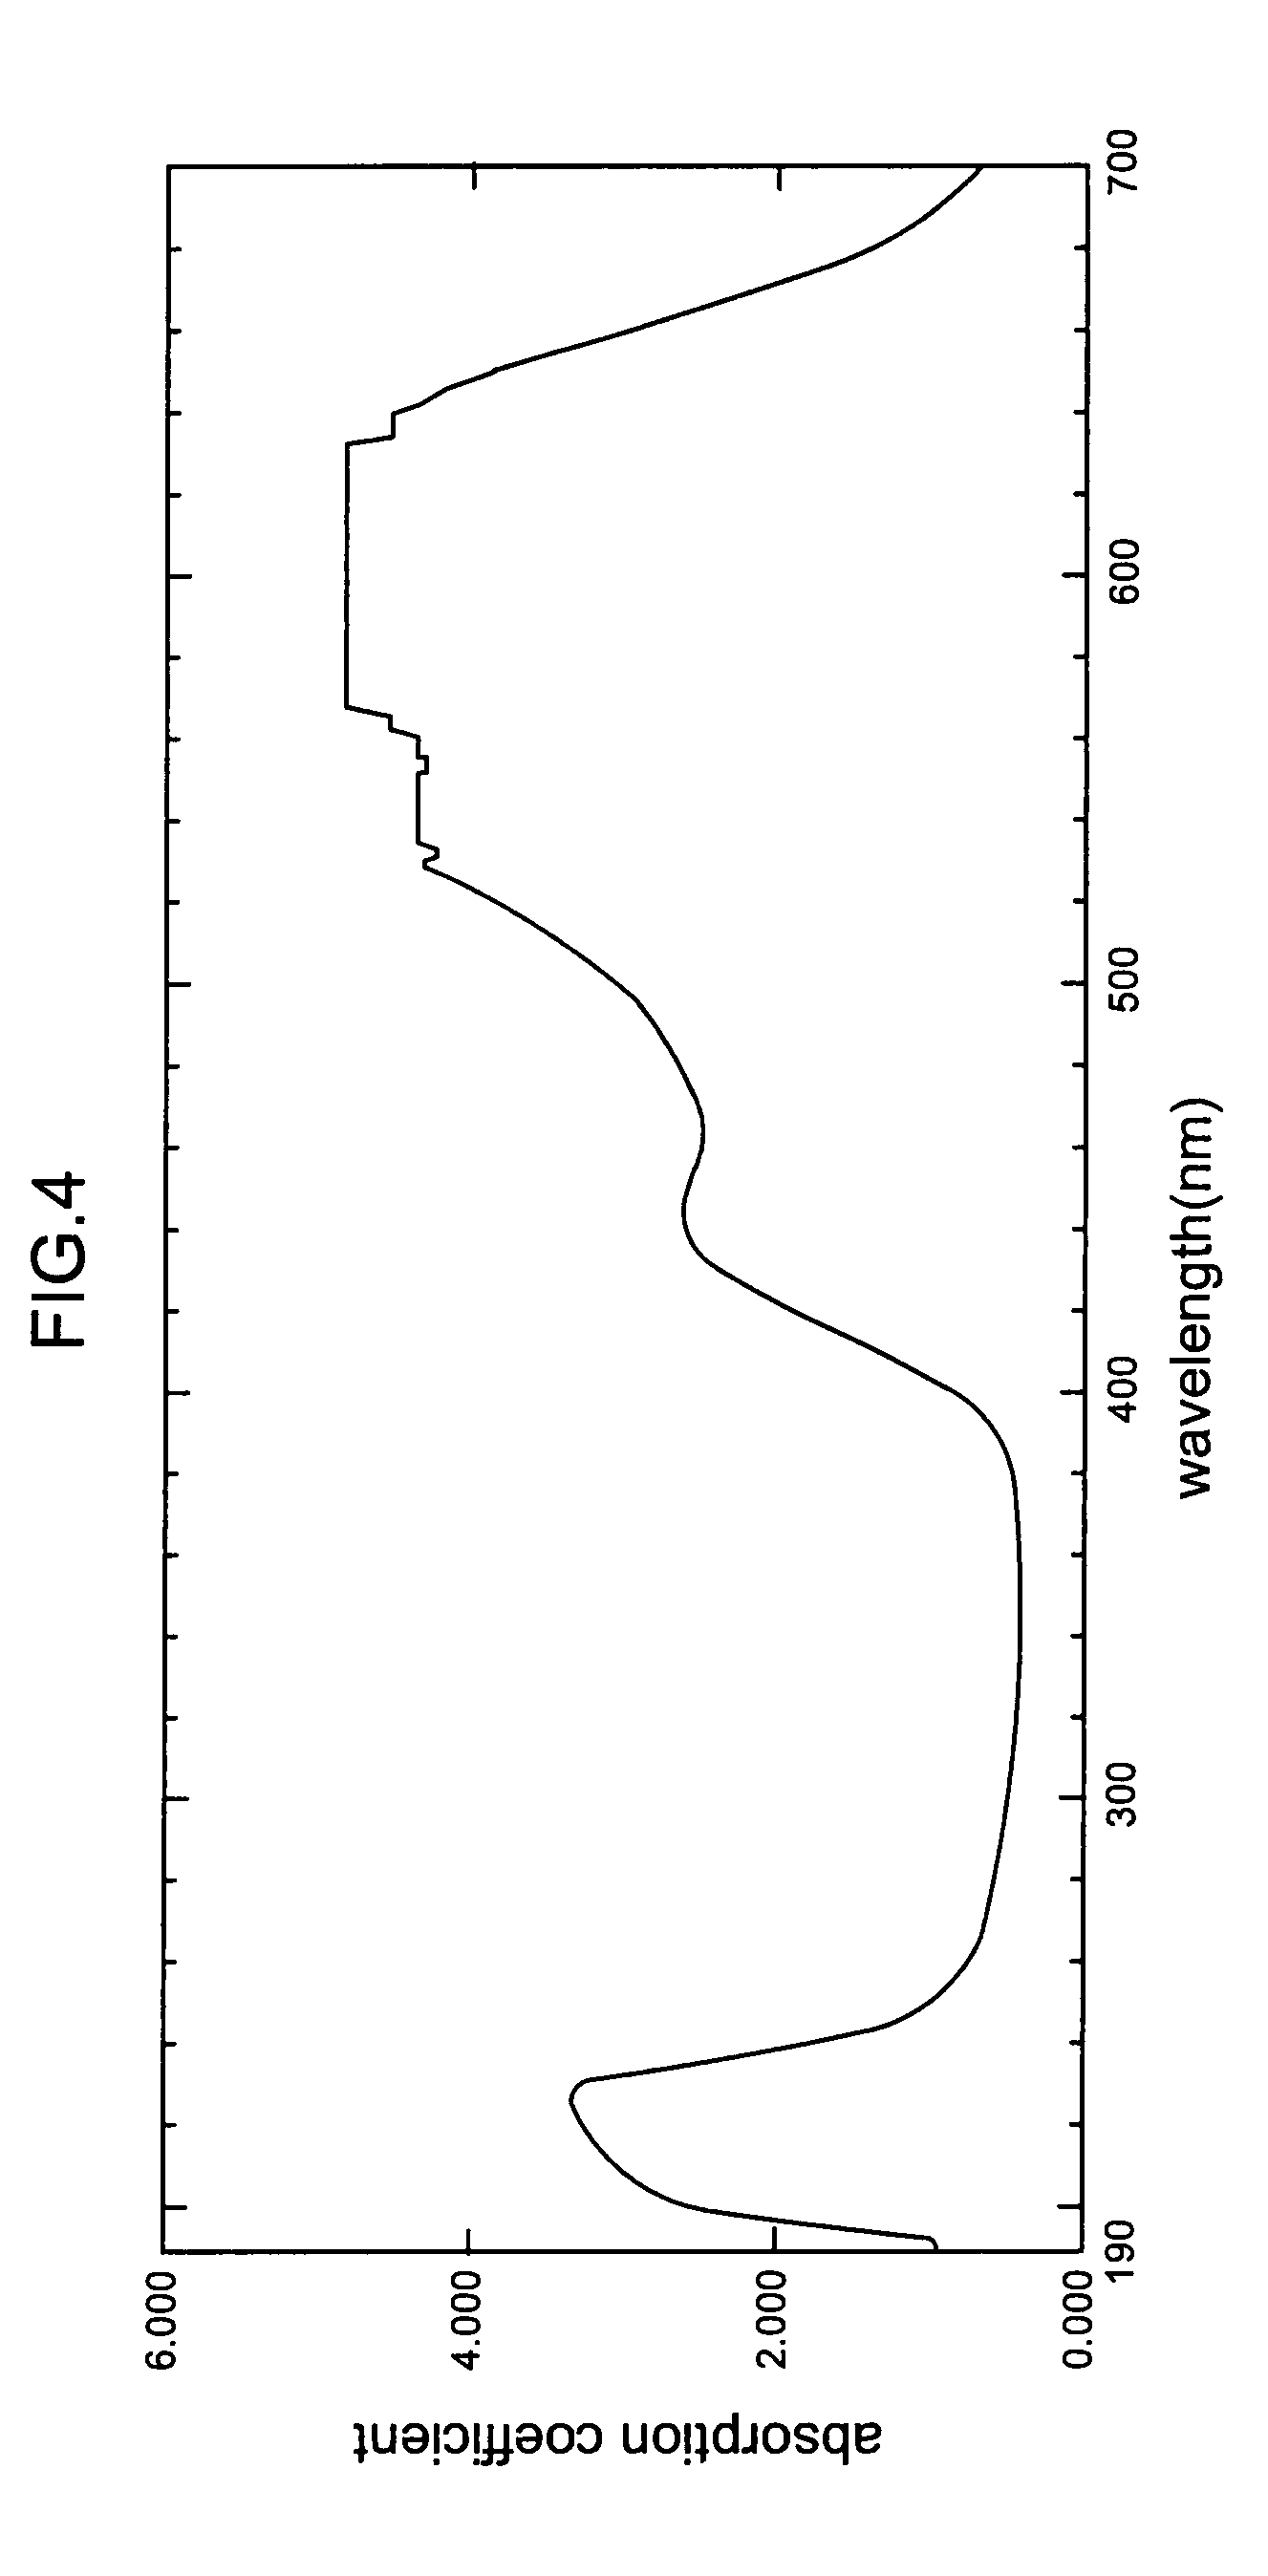 Filter function-equipped optical sensor and flame sensor